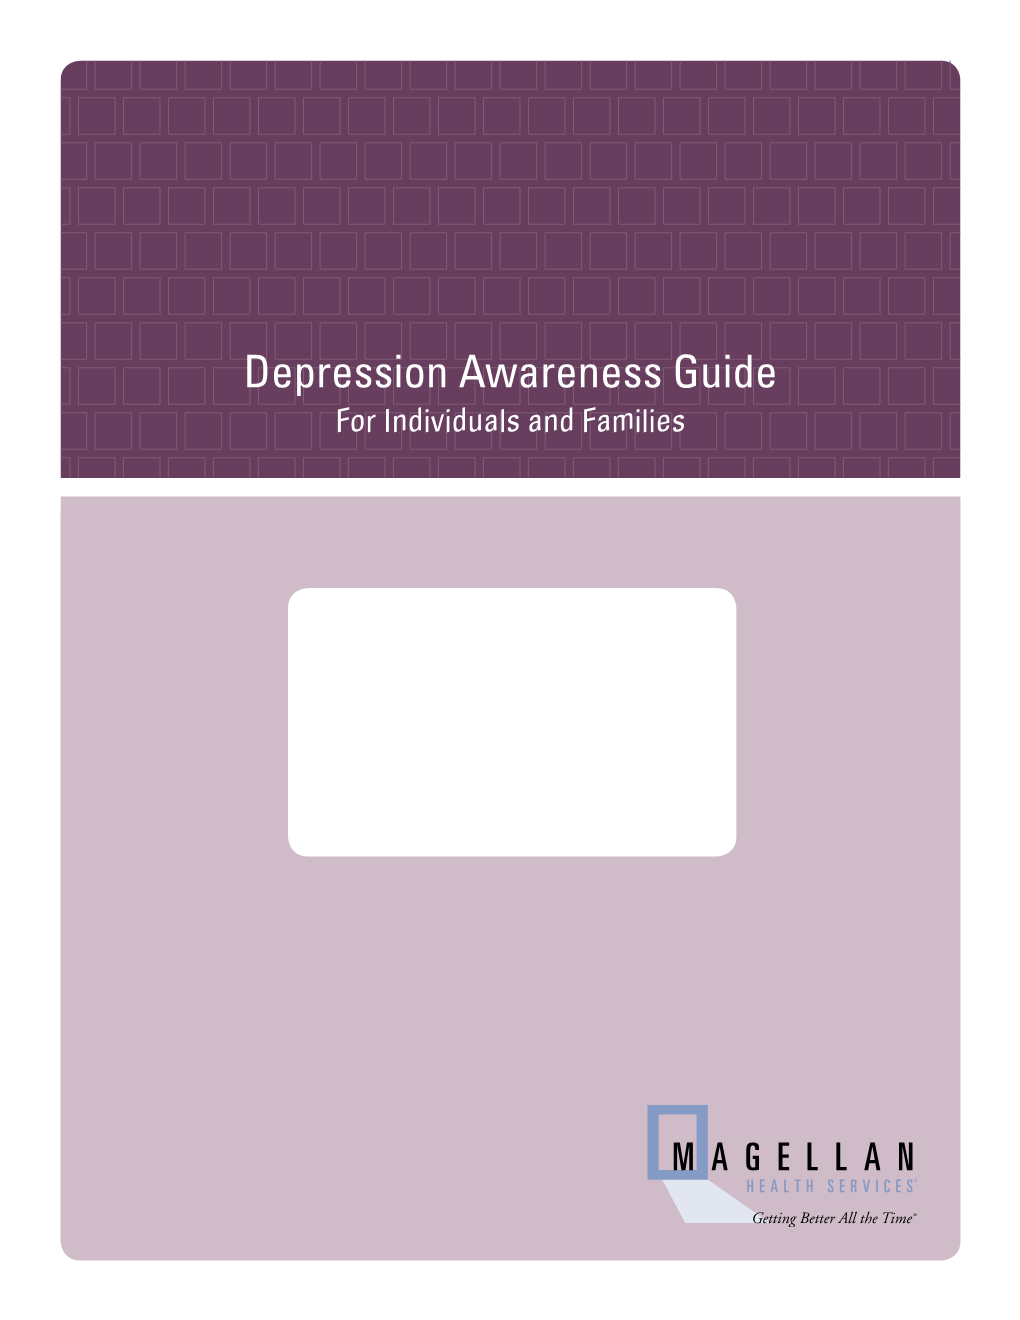 Depression Awareness Guide for Individuals and Families Table of Contents